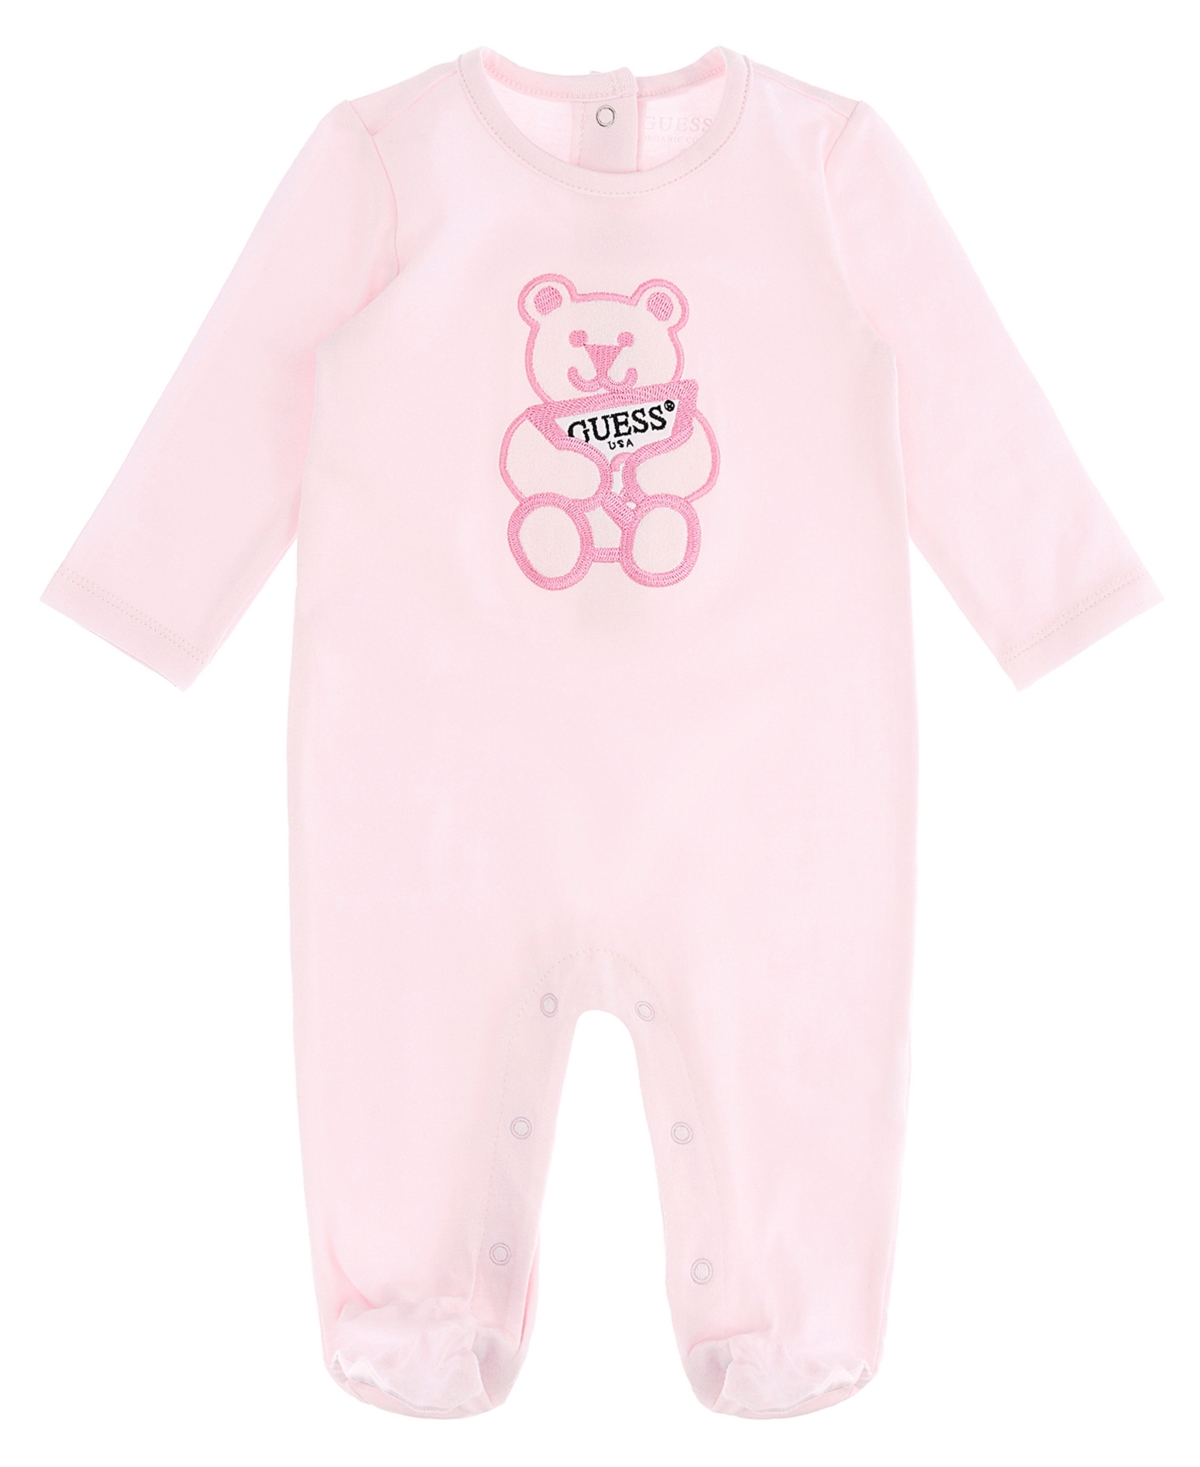 GUESS BABY GIRLS S EMBROIDERED BEAR TRIANGLE LOGO FOOTED COVERALL